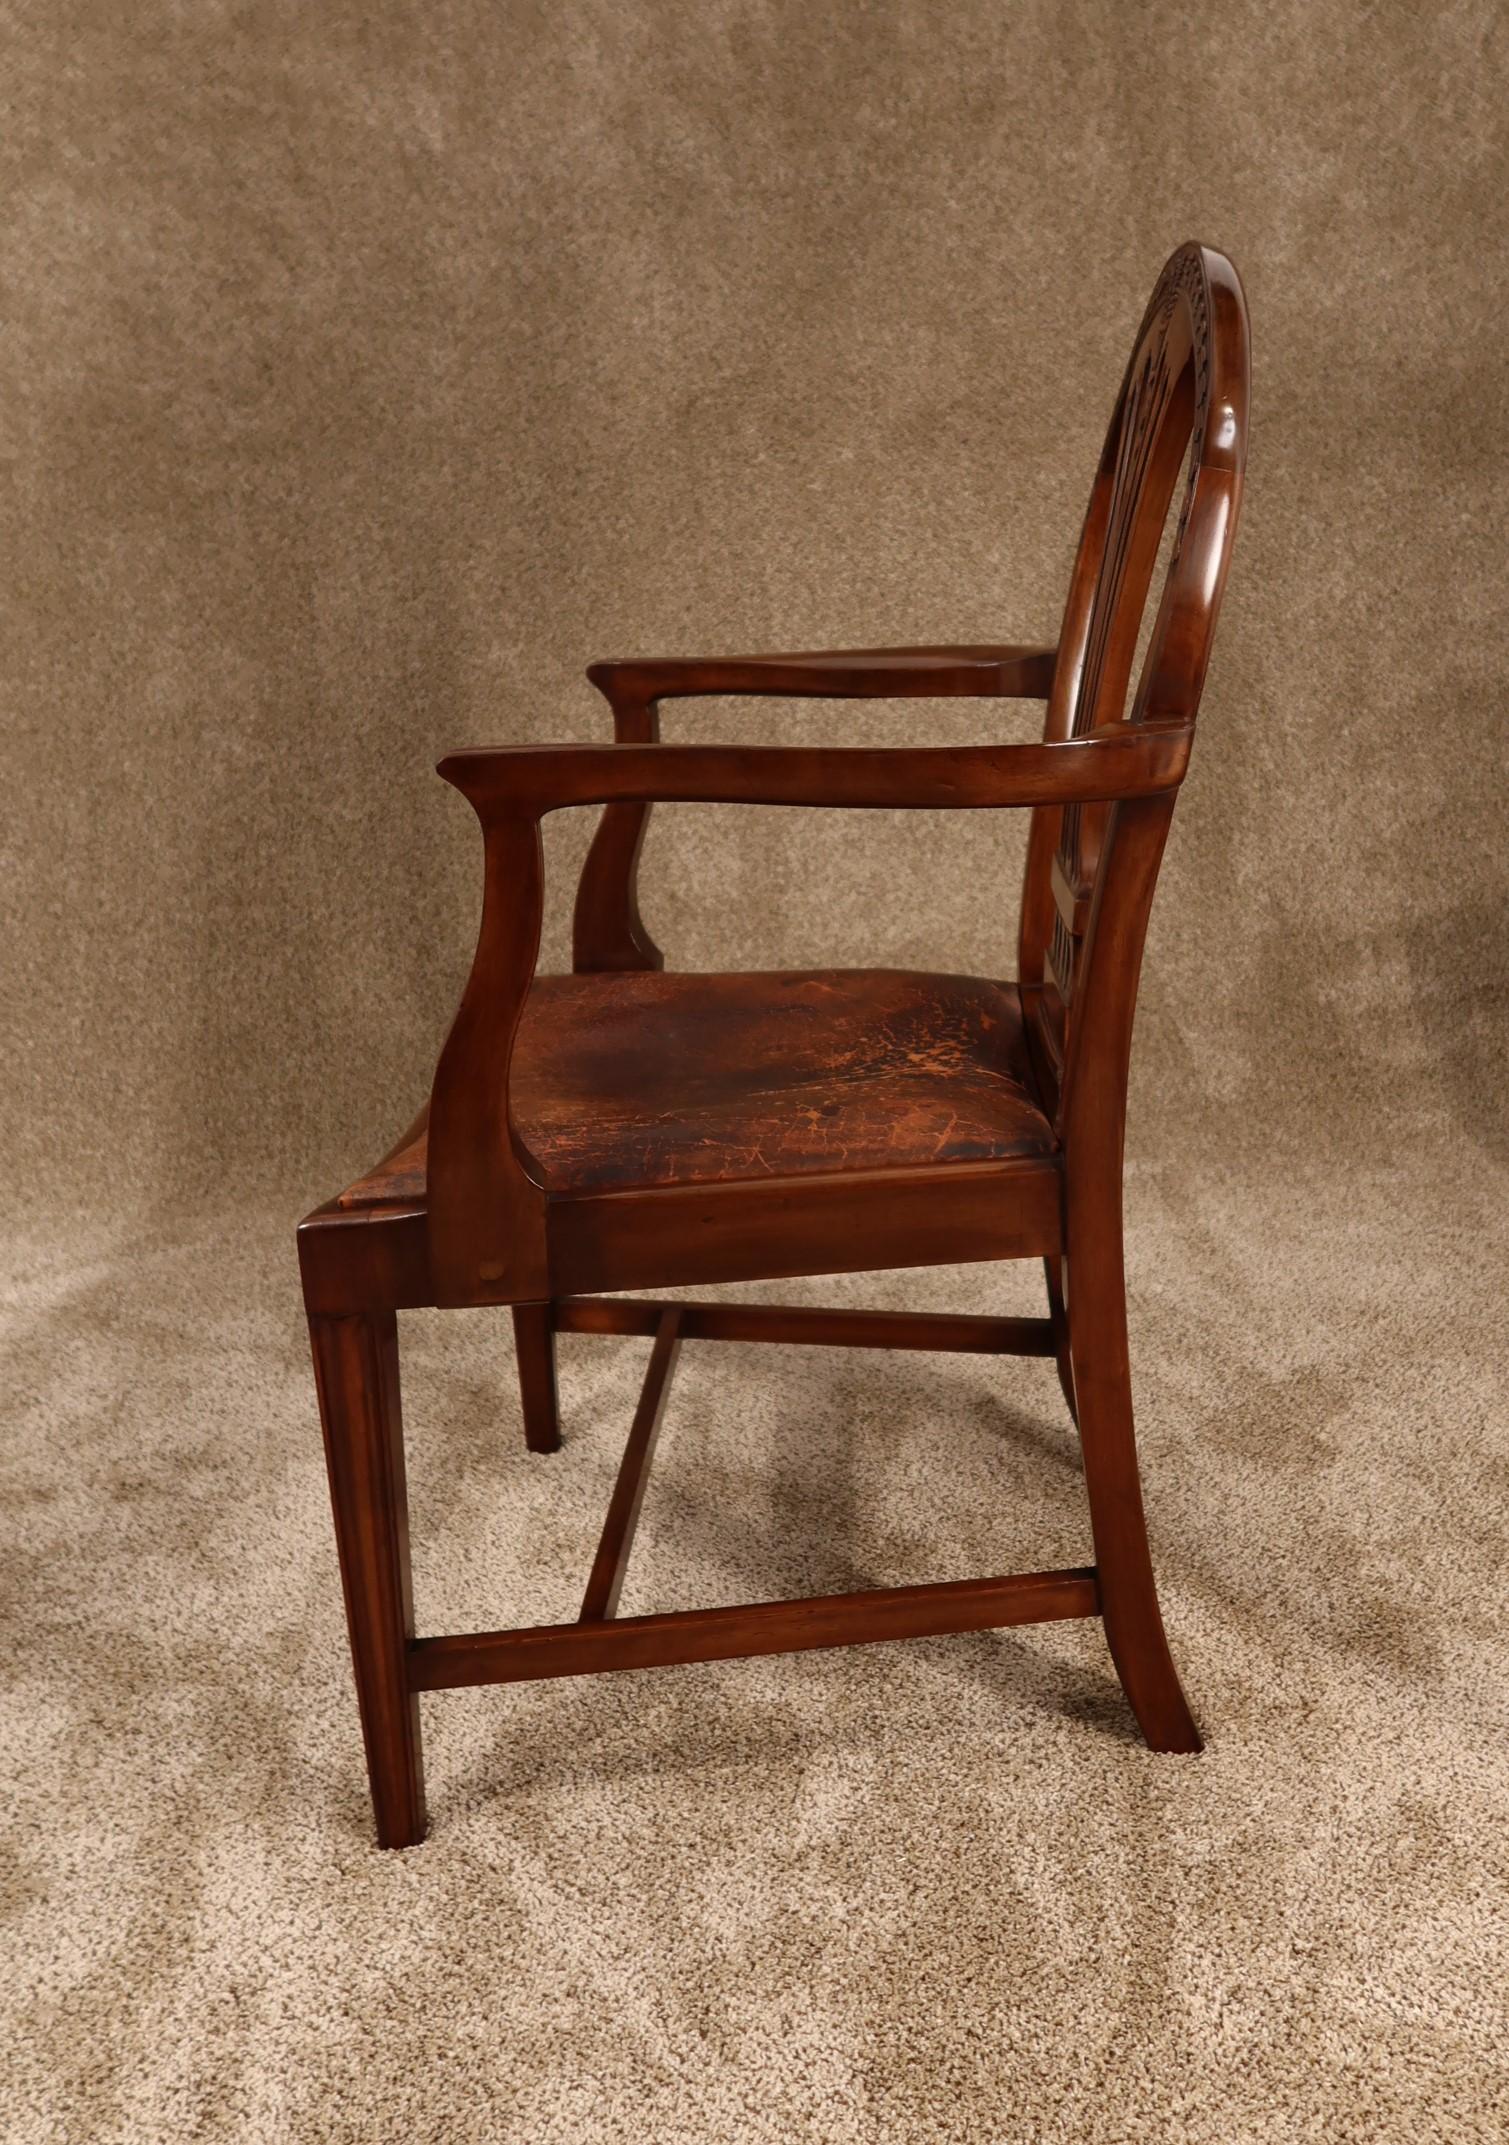 Exceptional Set of 8 English Hepplewhite Style Dining Chairs, circa 1880 In Good Condition For Sale In Barrington, IL